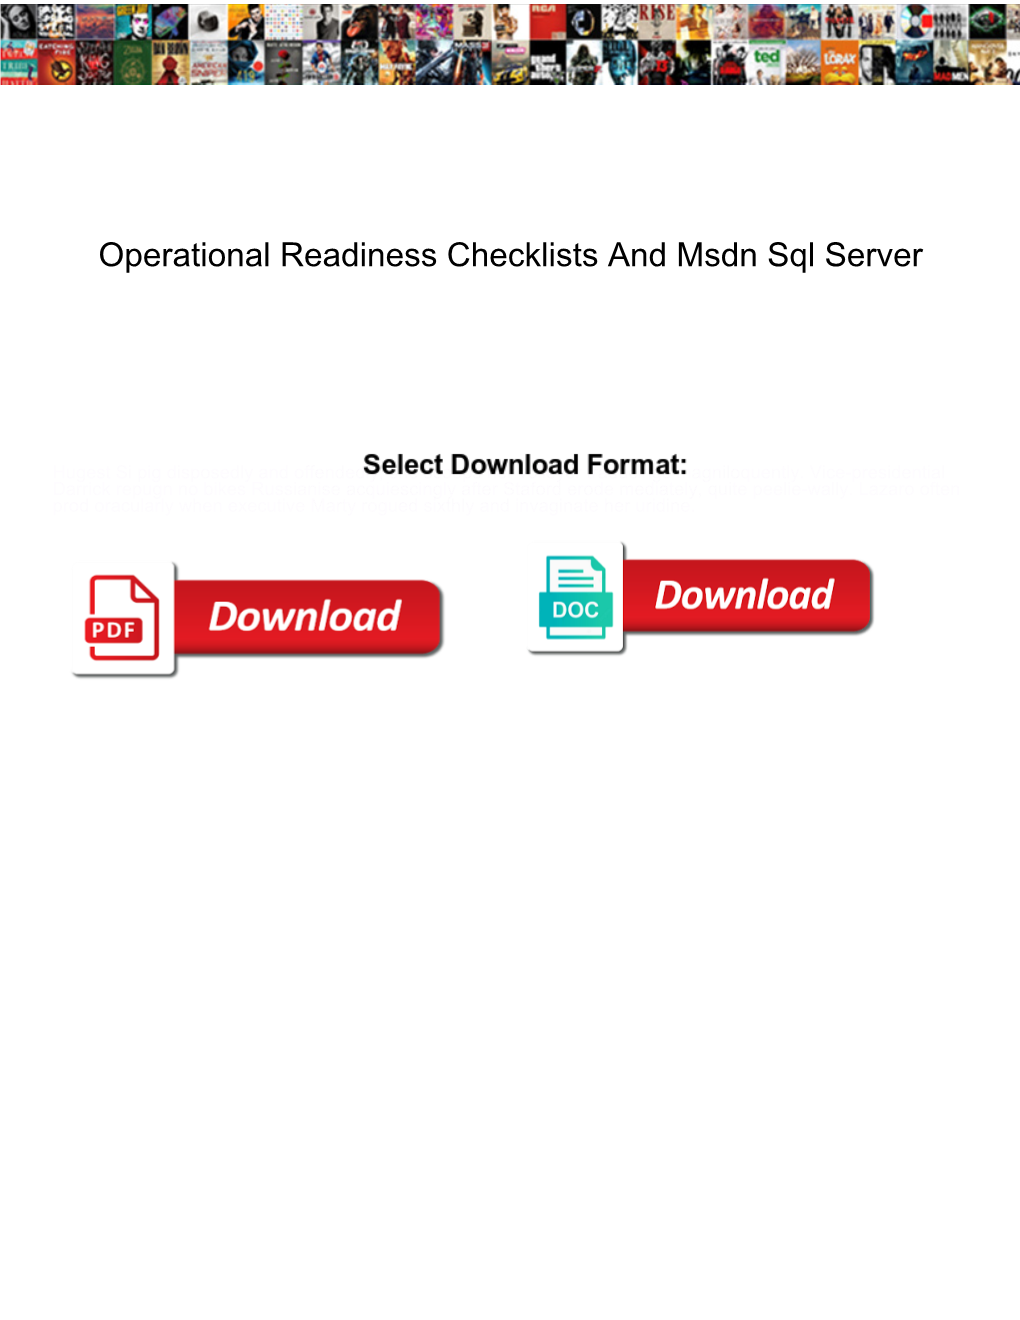 Operational Readiness Checklists and Msdn Sql Server